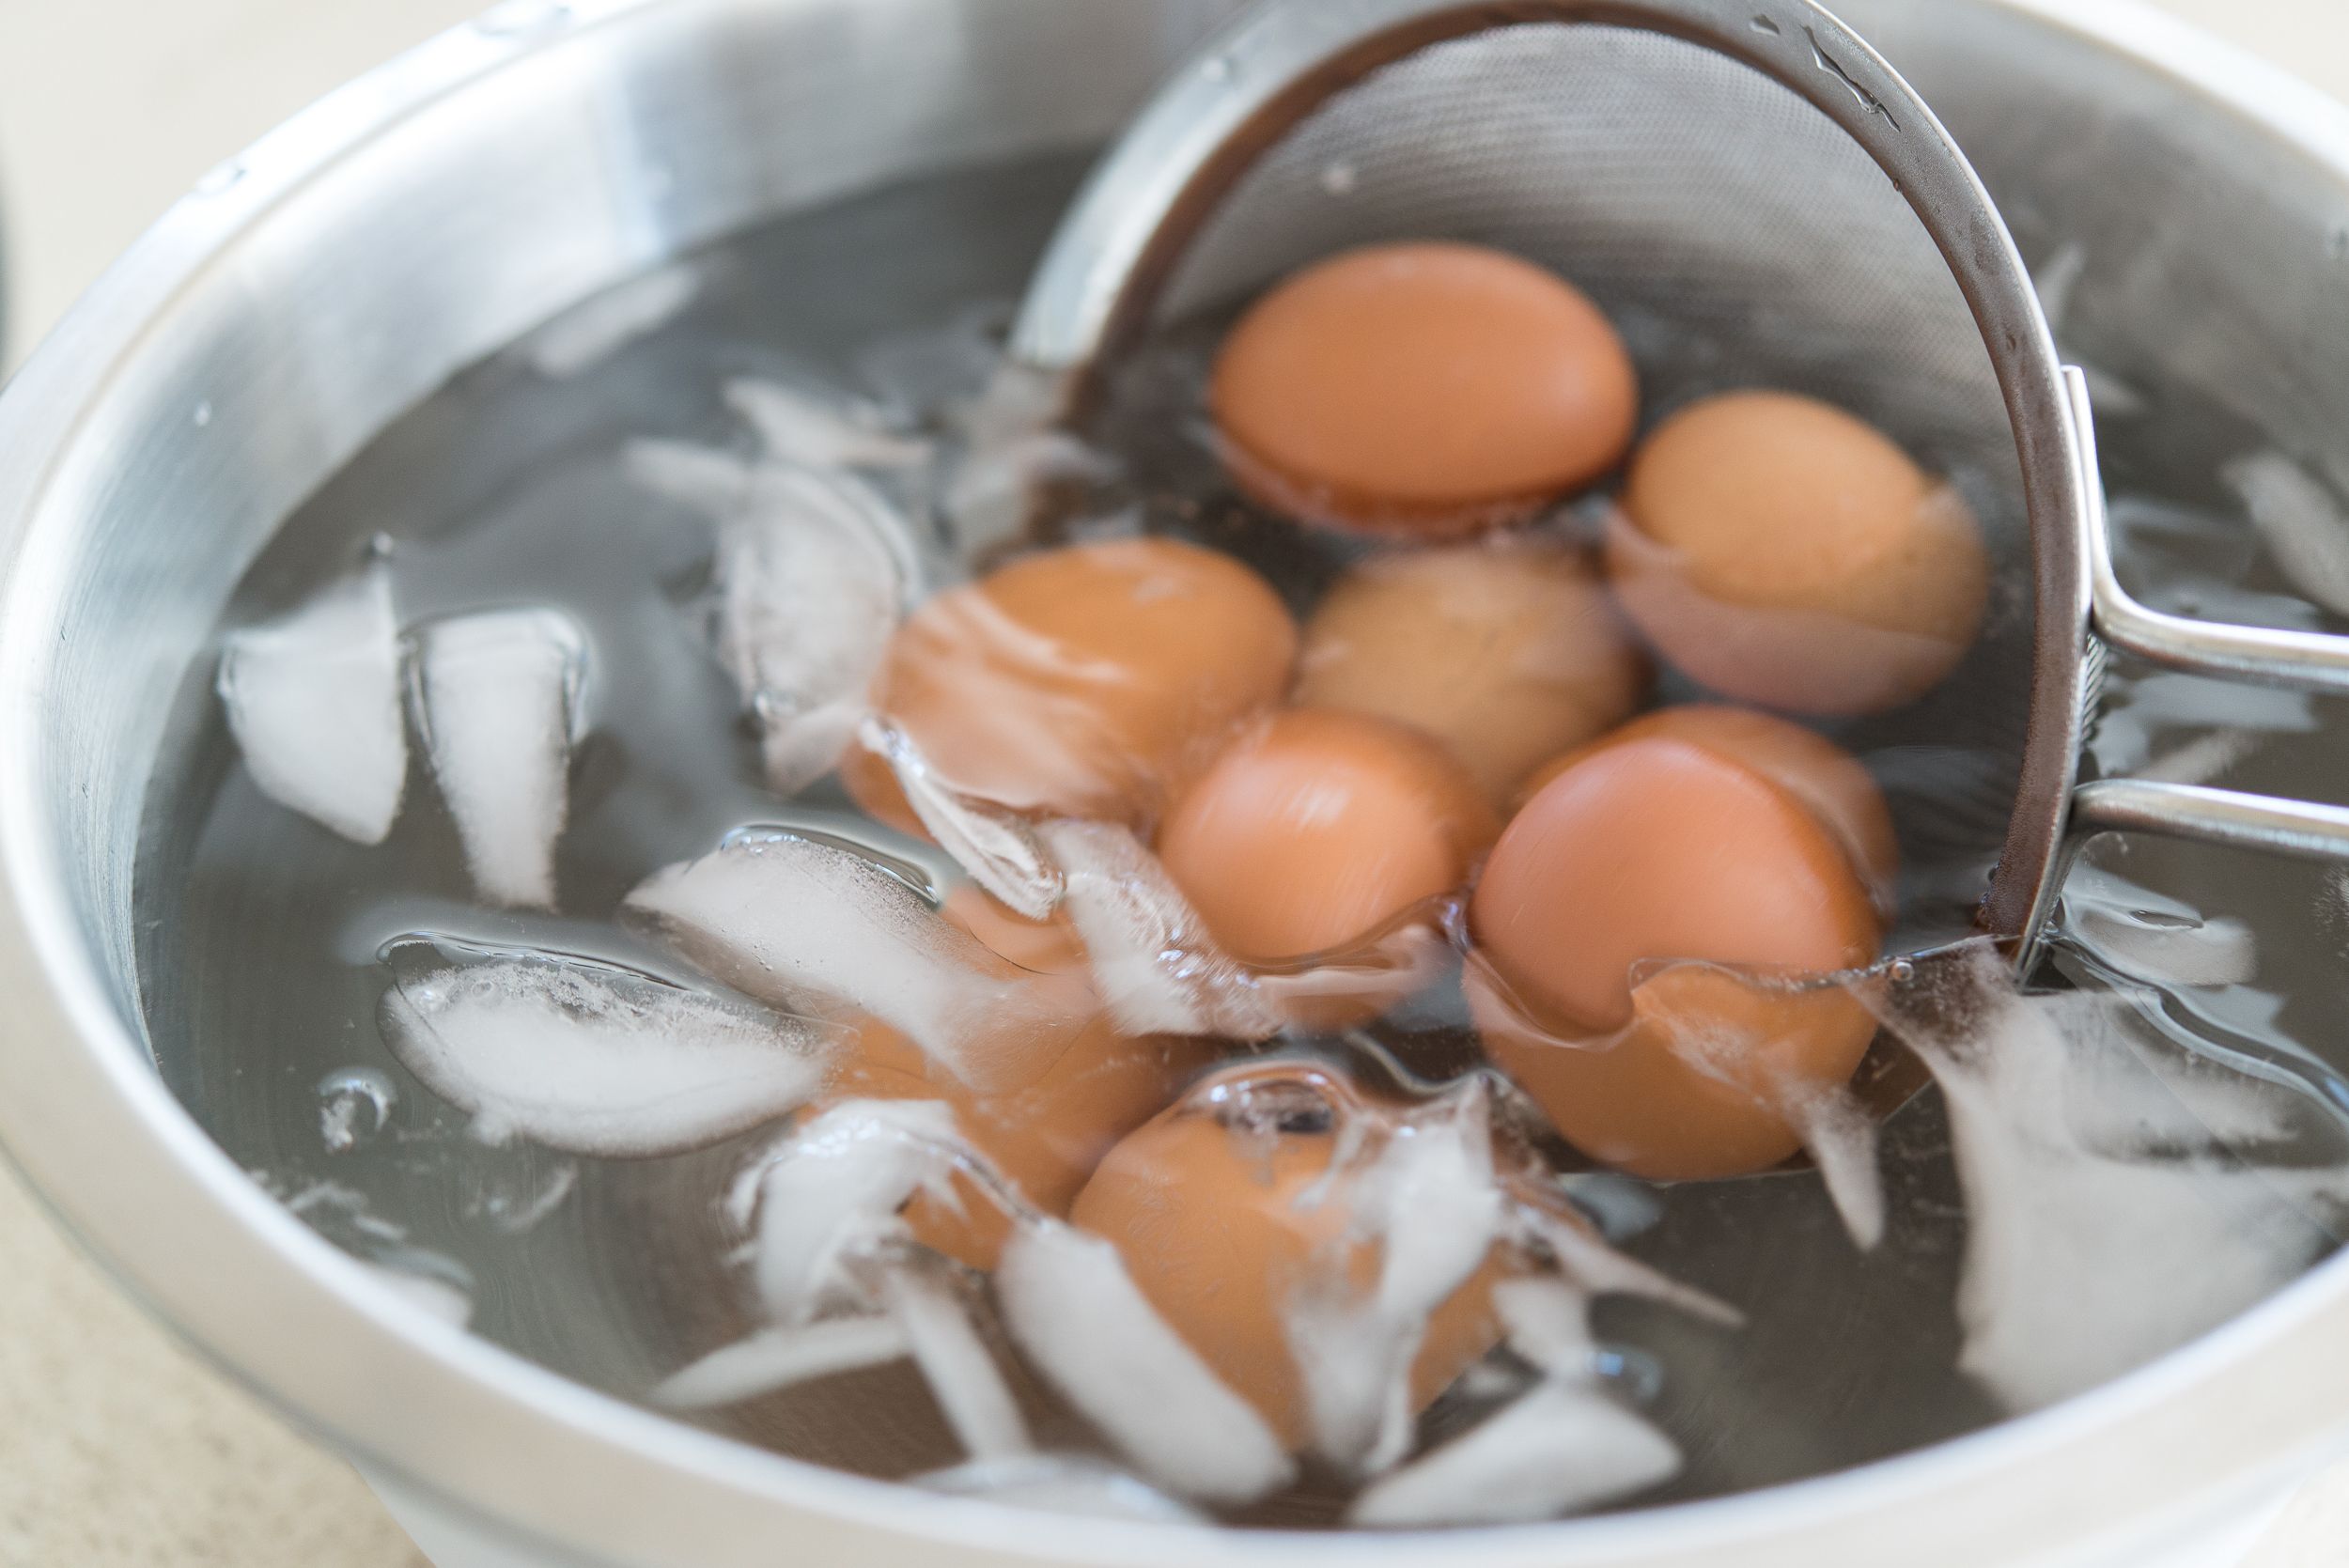 https://hips.hearstapps.com/thepioneerwoman/wp-content/uploads/2015/10/perfect-easy-to-peel-hard-boiled-eggs-05.jpg